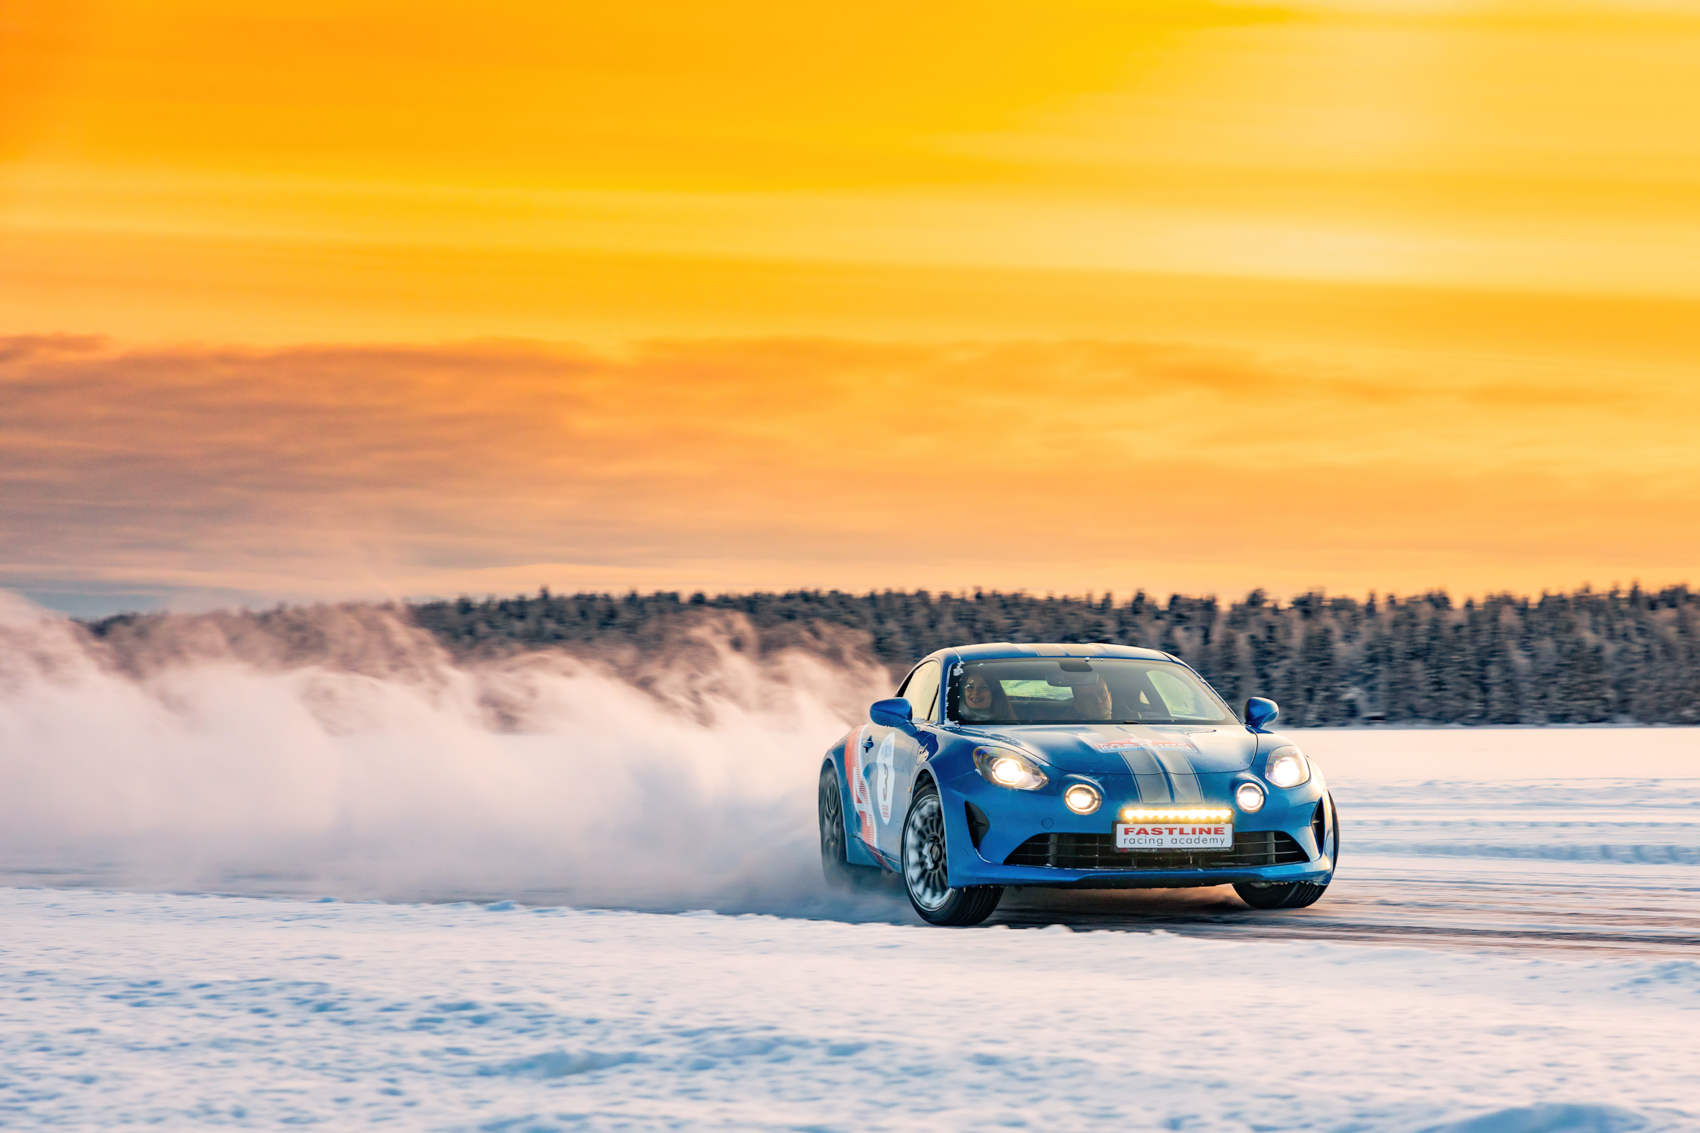 Fastline Ice Driving Experience - Alpine A110